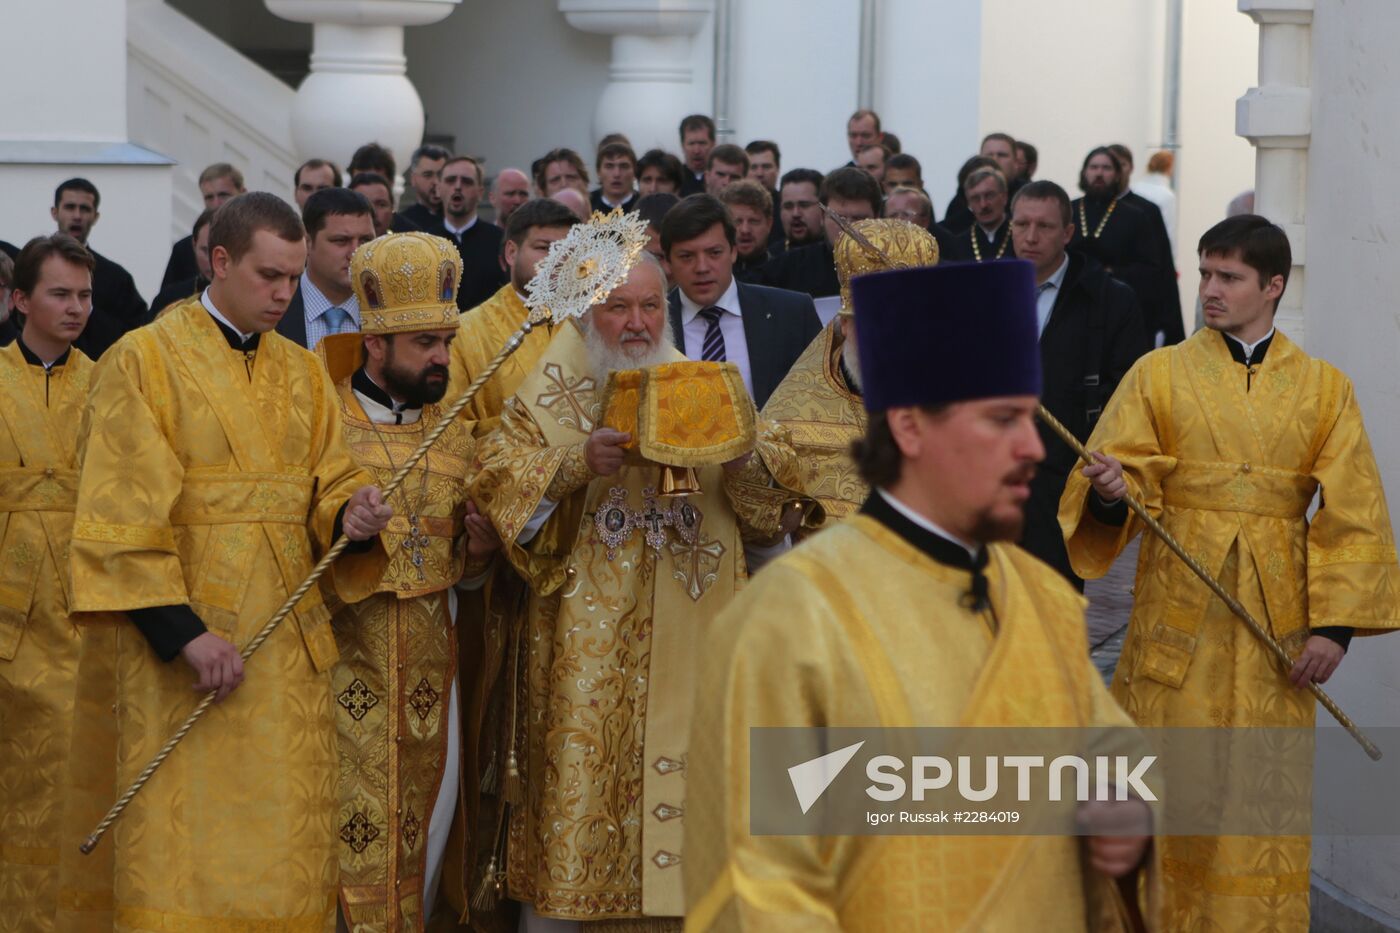 St Theodore's Cathedral consecrated in St Petersburg